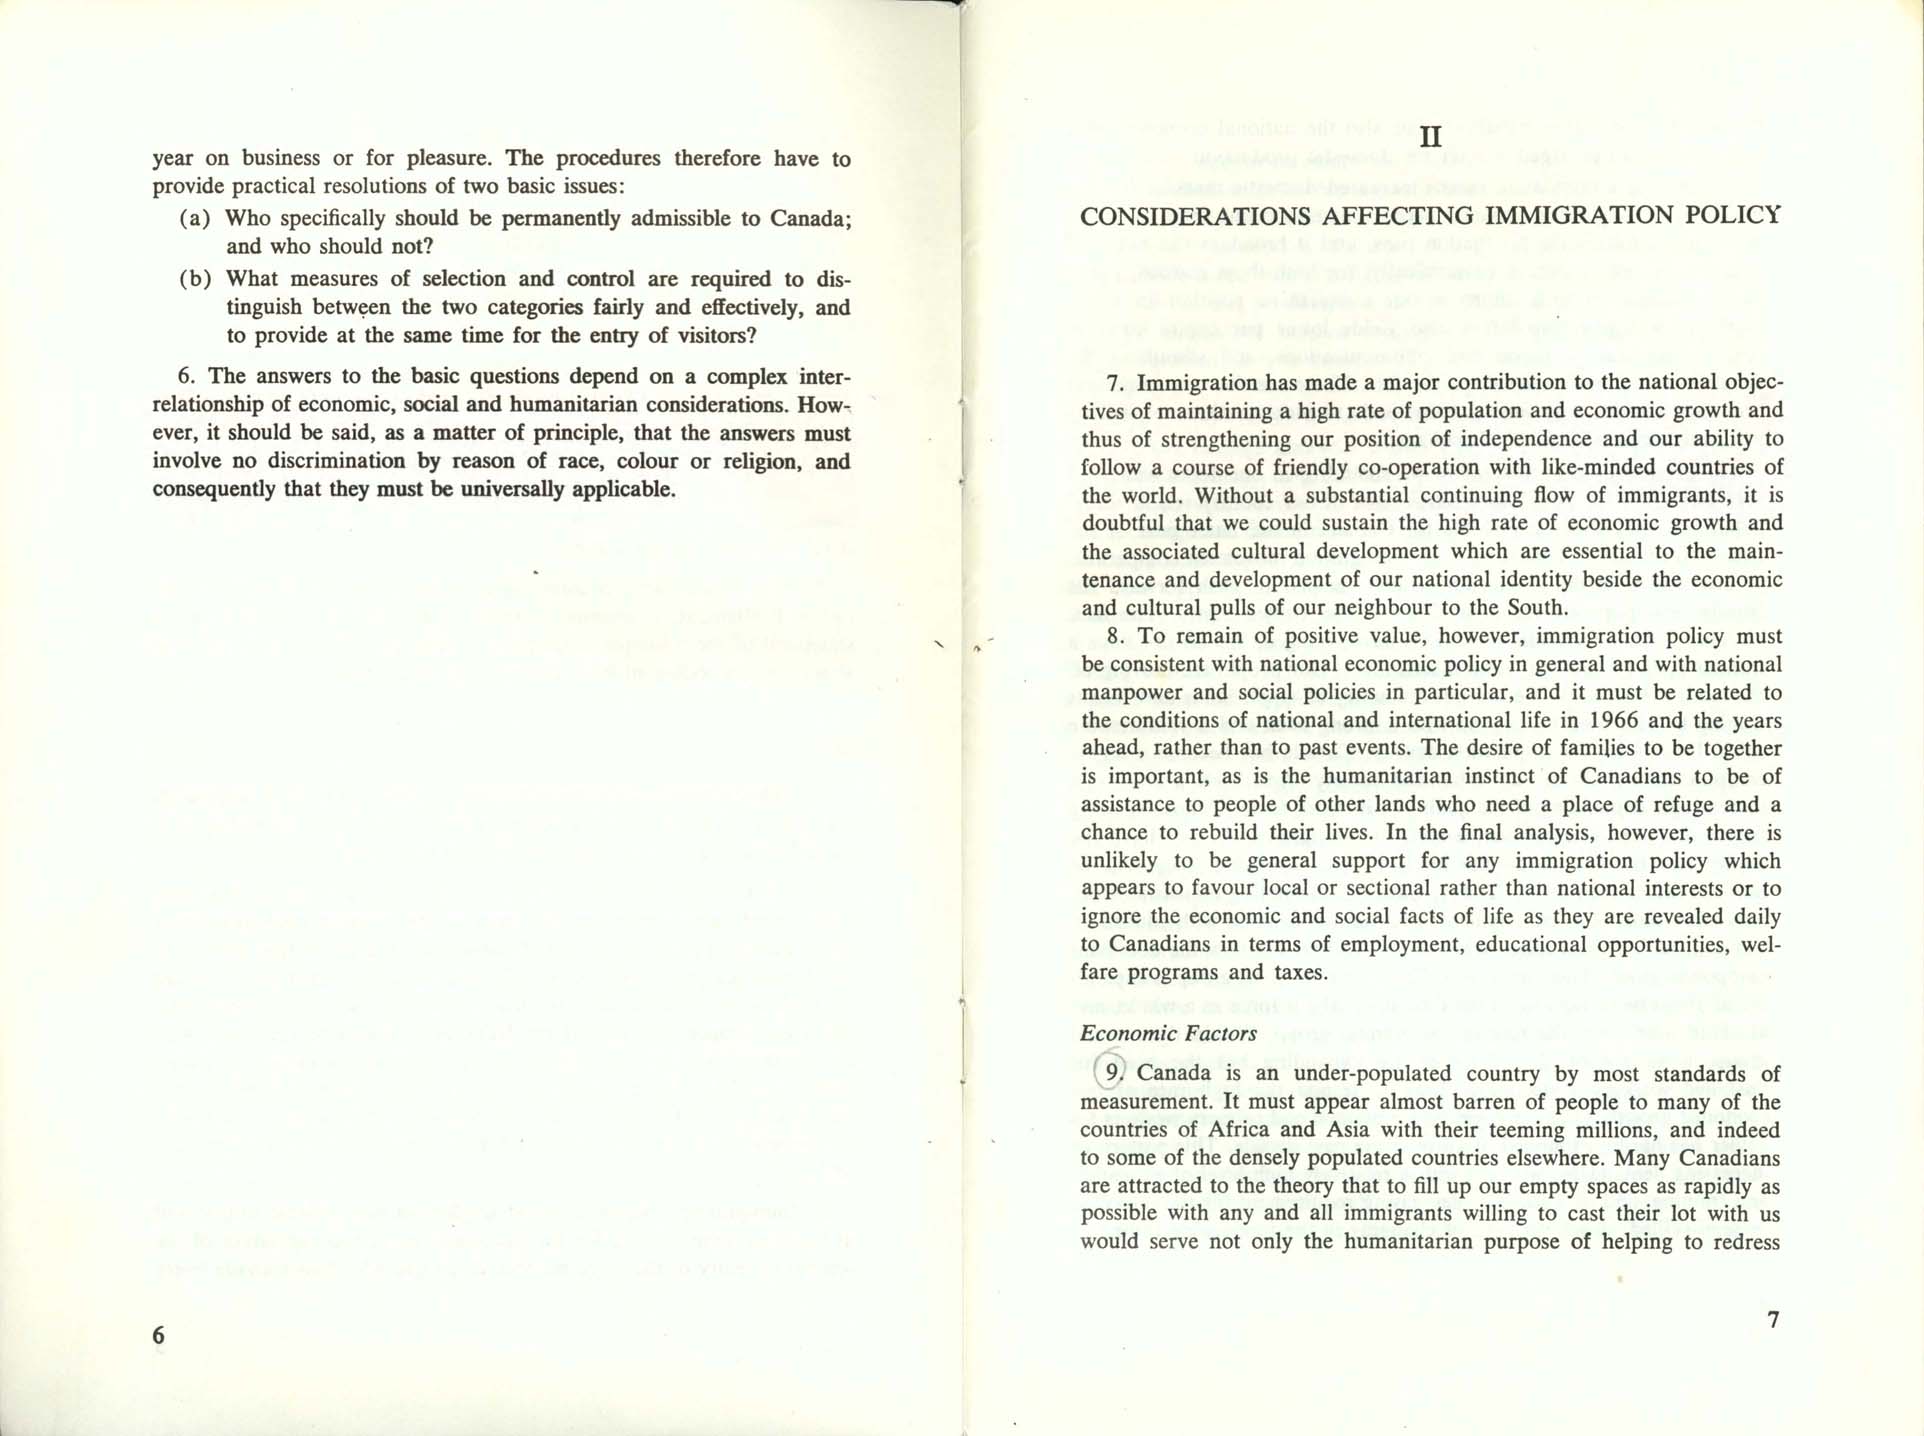 Page 6, 7 White Paper on Immigration, 1966